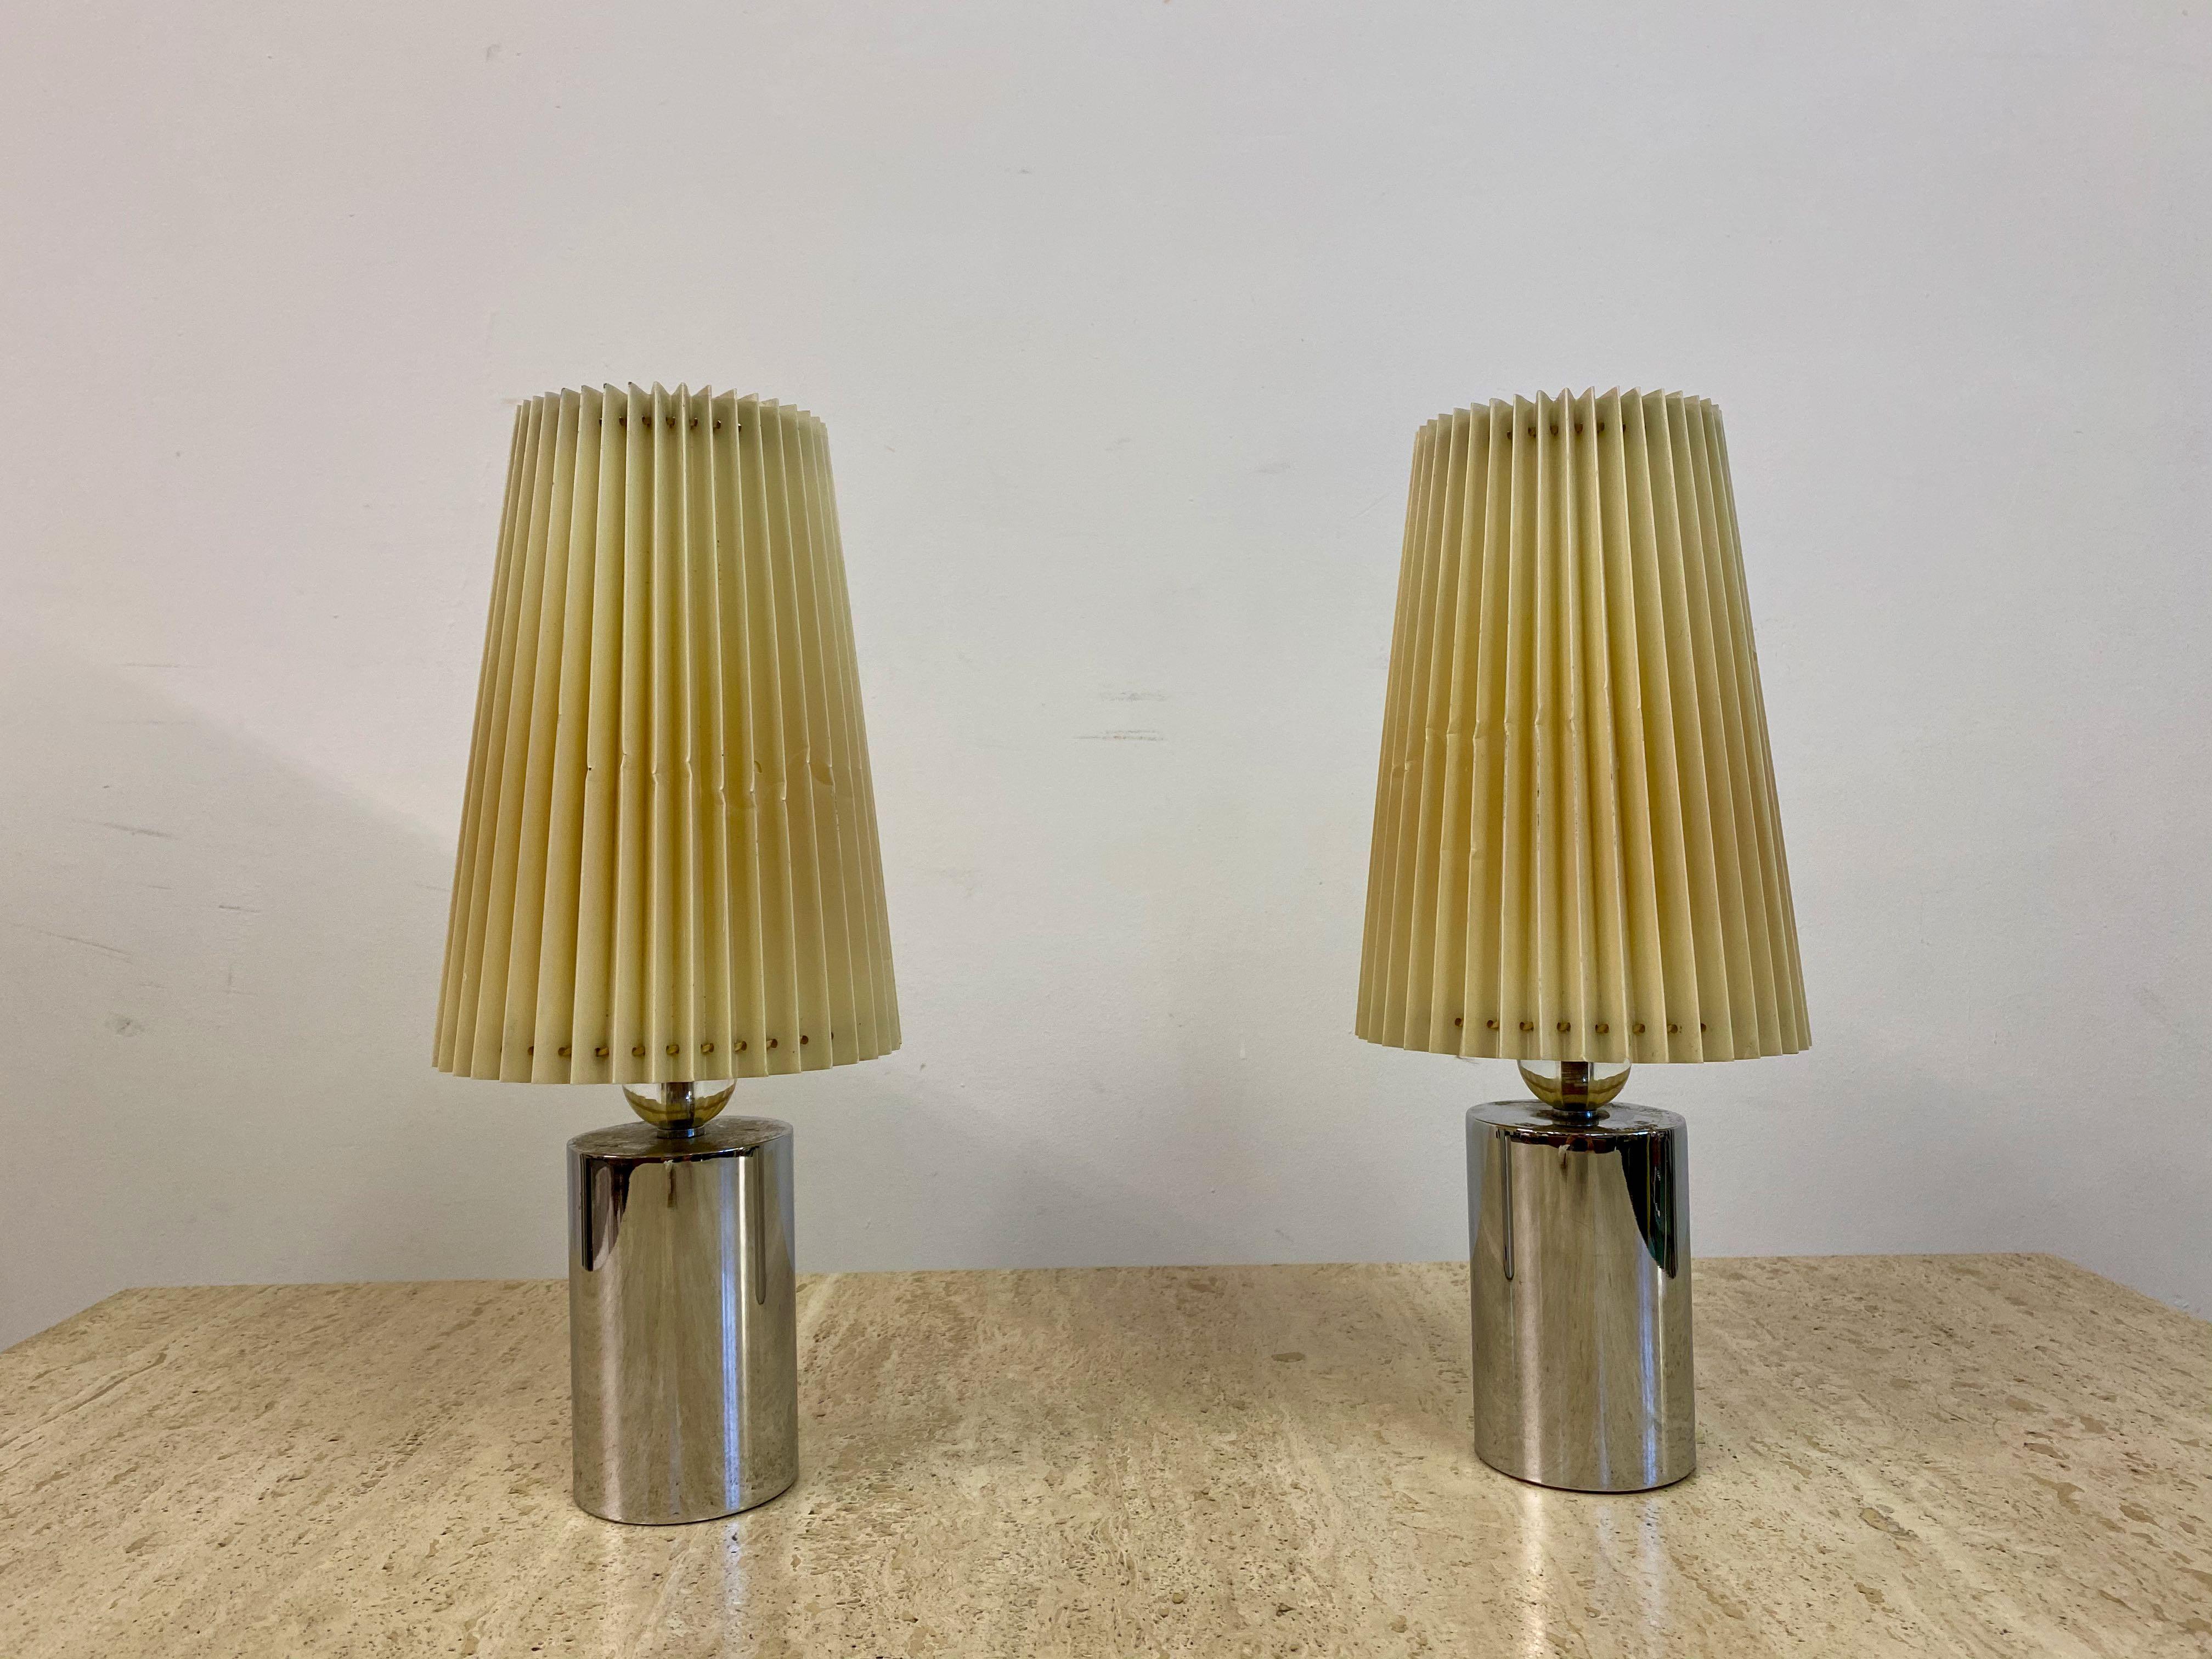 A pair of table lamps

Chrome cylindrical base

Crystal glass ball on top

Corrugated shade

France, 1940s.